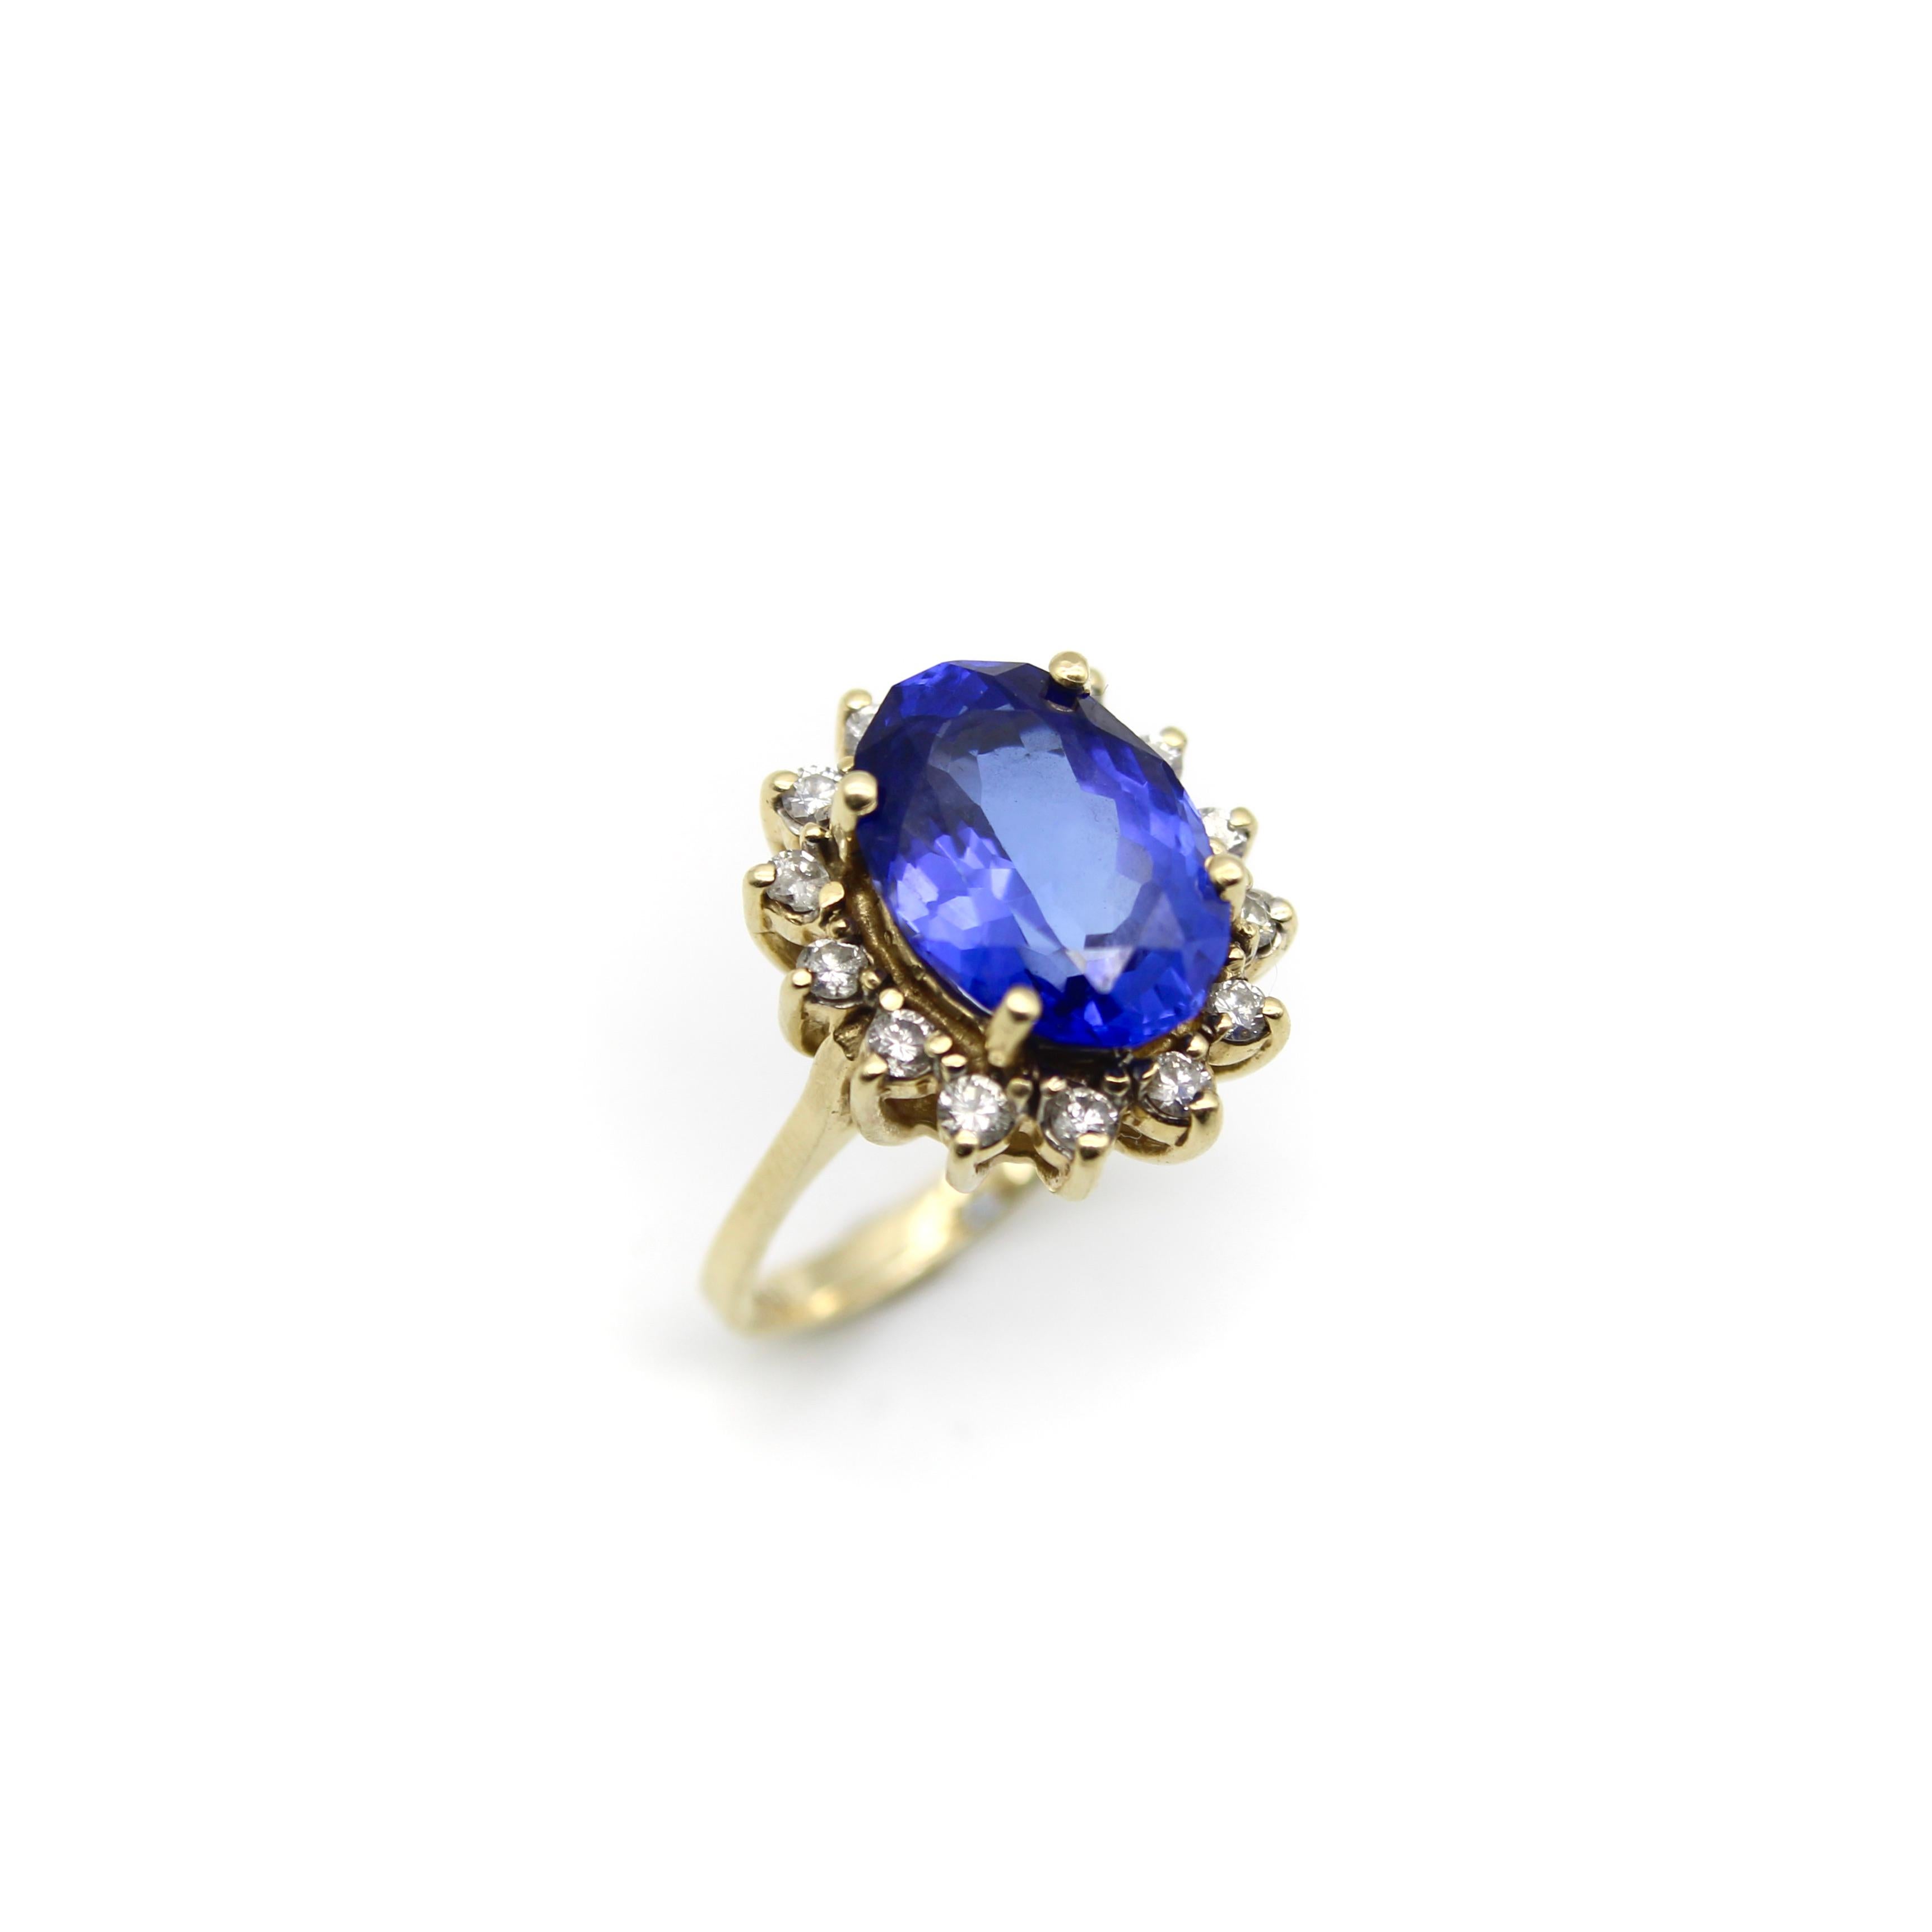 This beautiful vintage 14k gold ring features an oval tanzanite framed by a halo of round brilliant diamonds. The tanzanite is a gorgeous rich blue color with purple undertones, which is considered to be one of the most desirable shades of